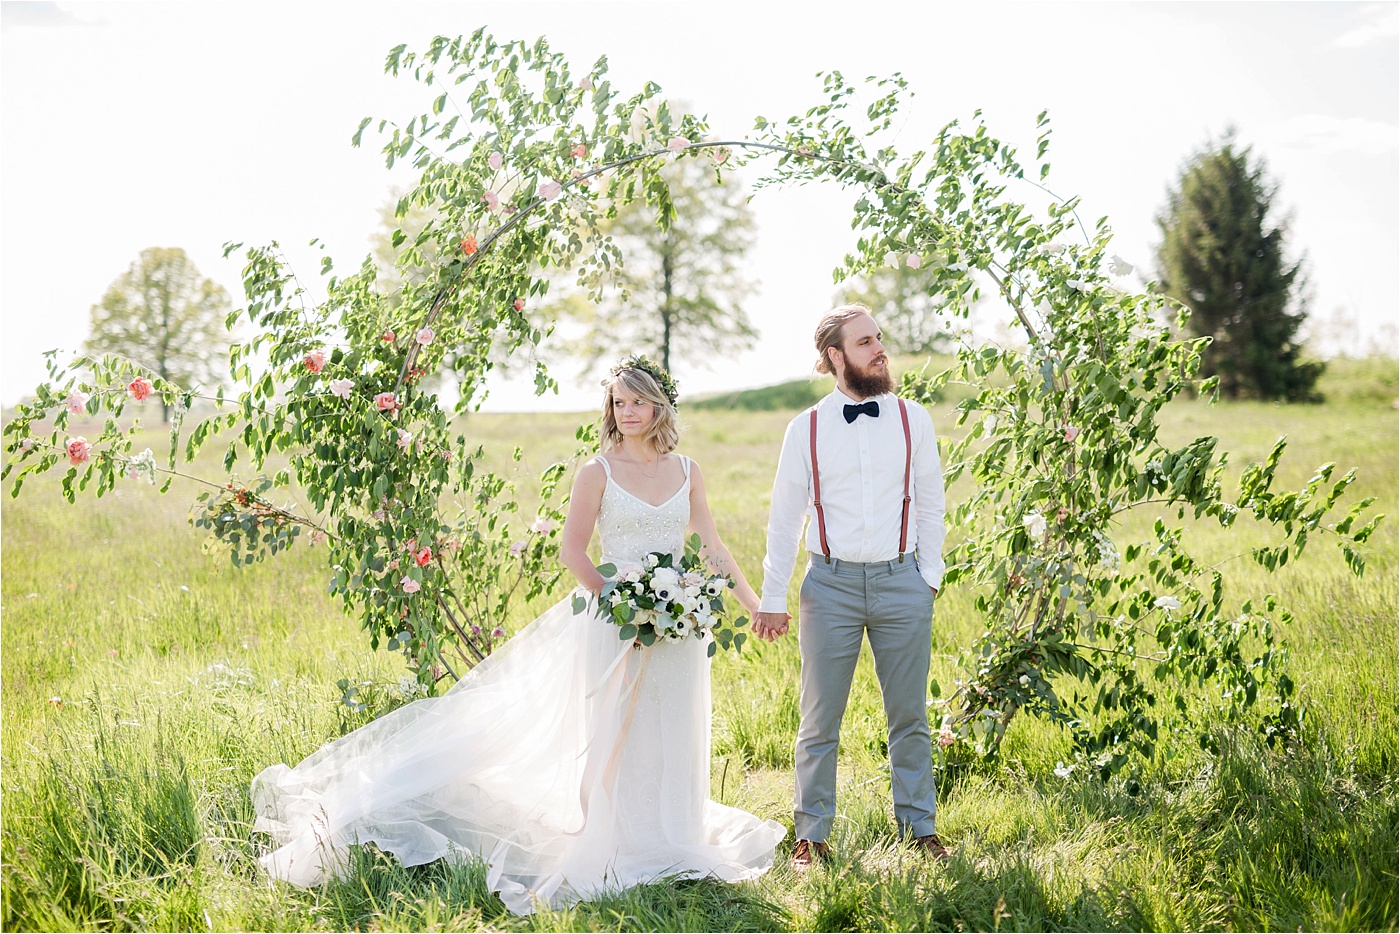 View More: http://karimephotography.pass.us/spring-styled-shoot-karime-photography